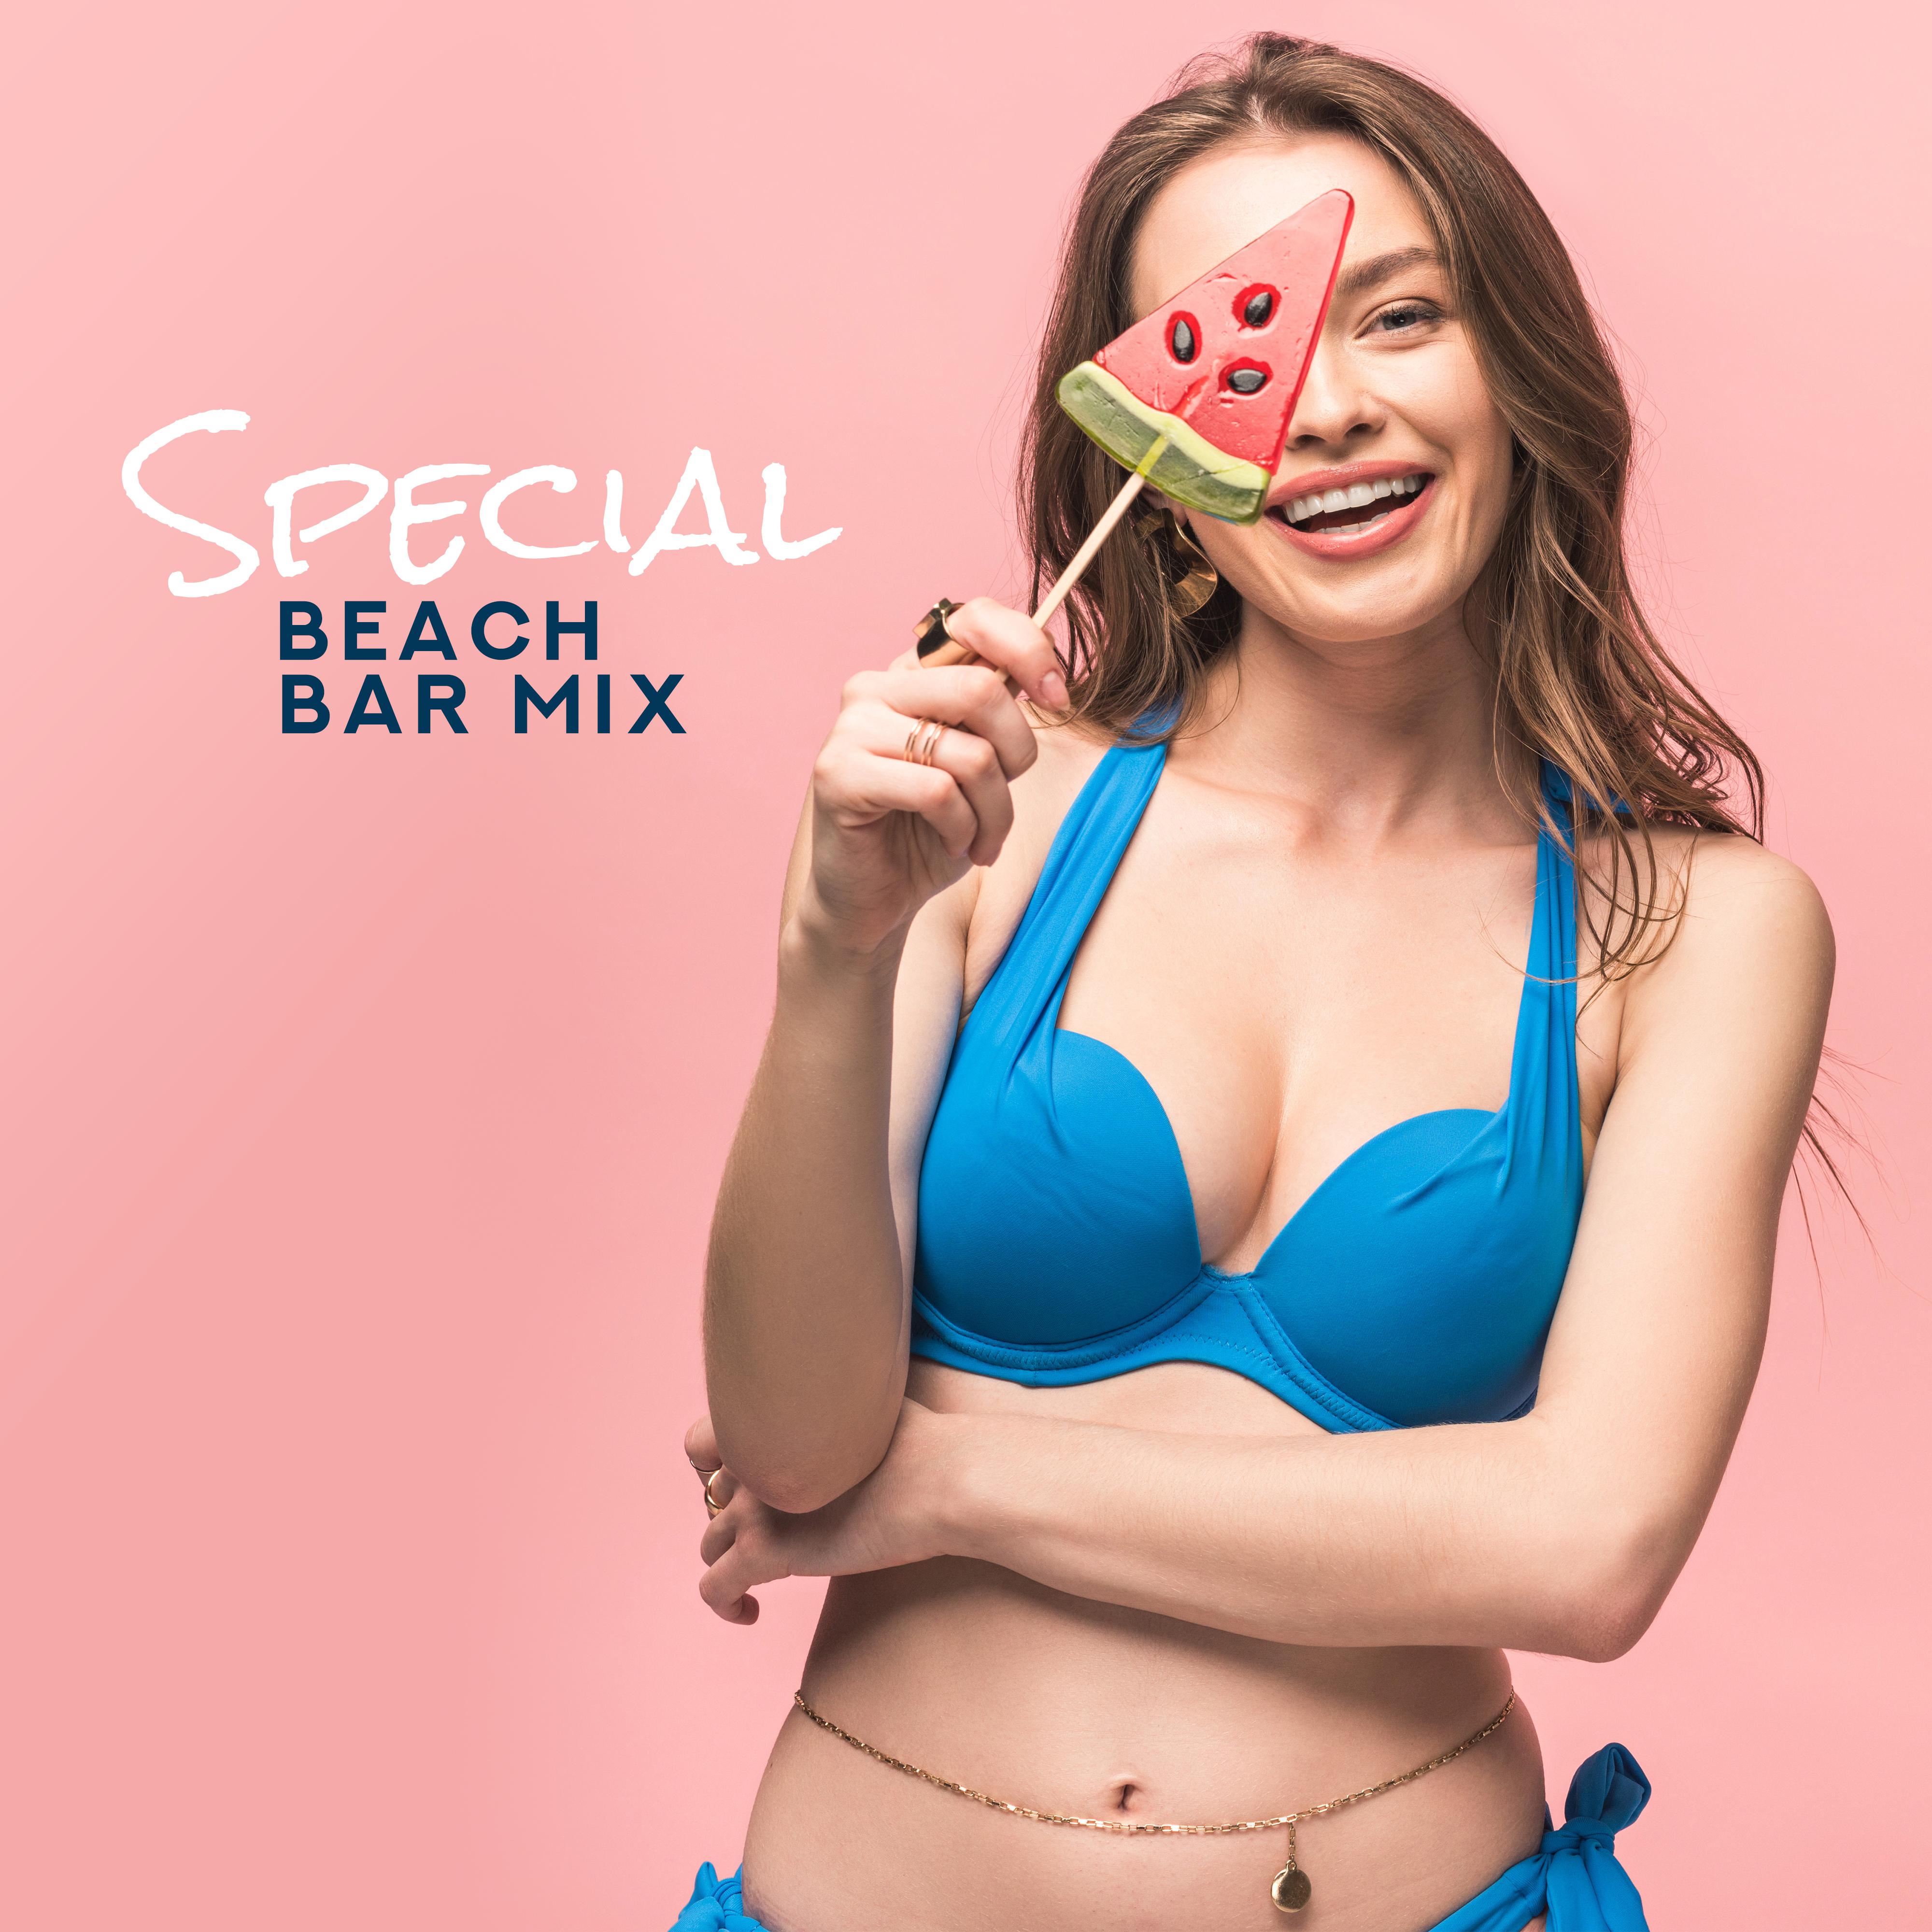 Special Beach Bar Mix: 2019 Chillout Music Compilation for Total Relax & Rest on the Beach, Summer Vacation Nice Time Spending, Pumping Beats & Ambient Melodies, Tropical Hoilady Anthems